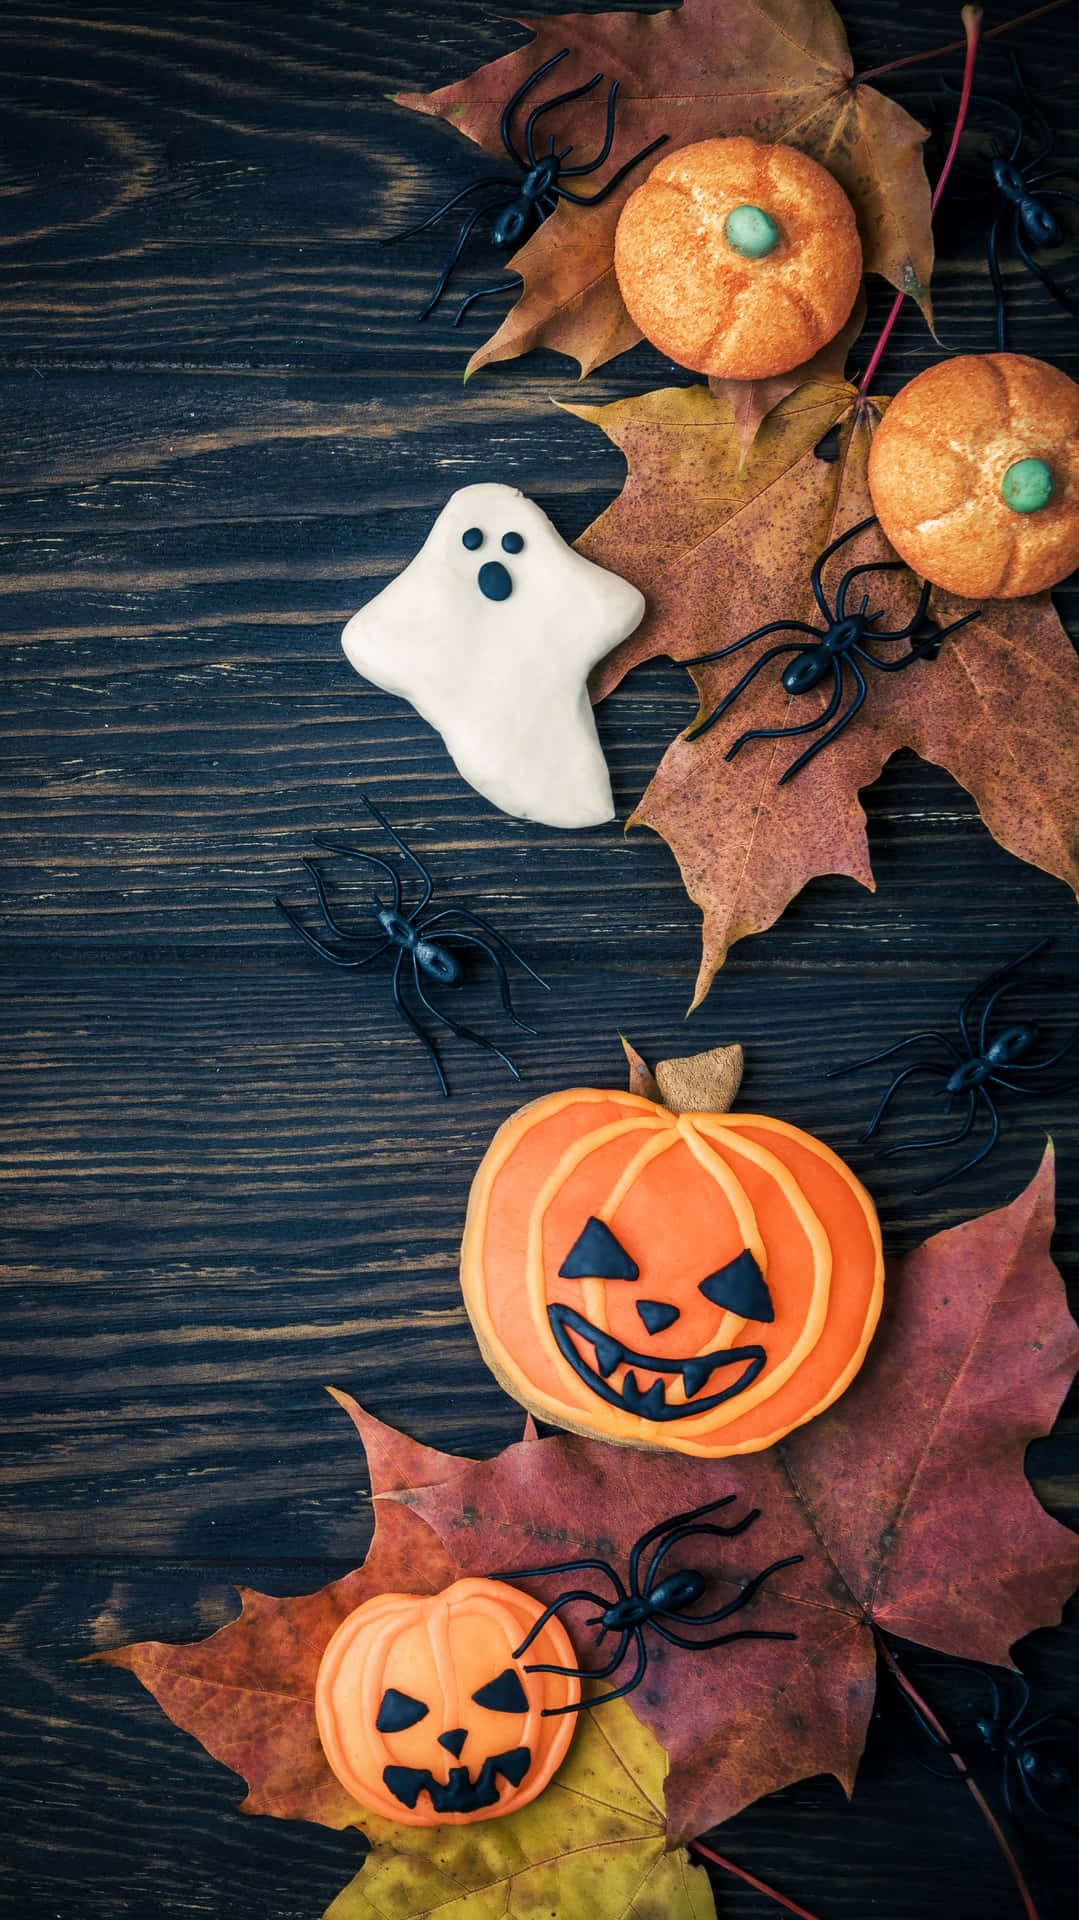 Get in the Halloween spirit with these adorable iPhone themed decorations